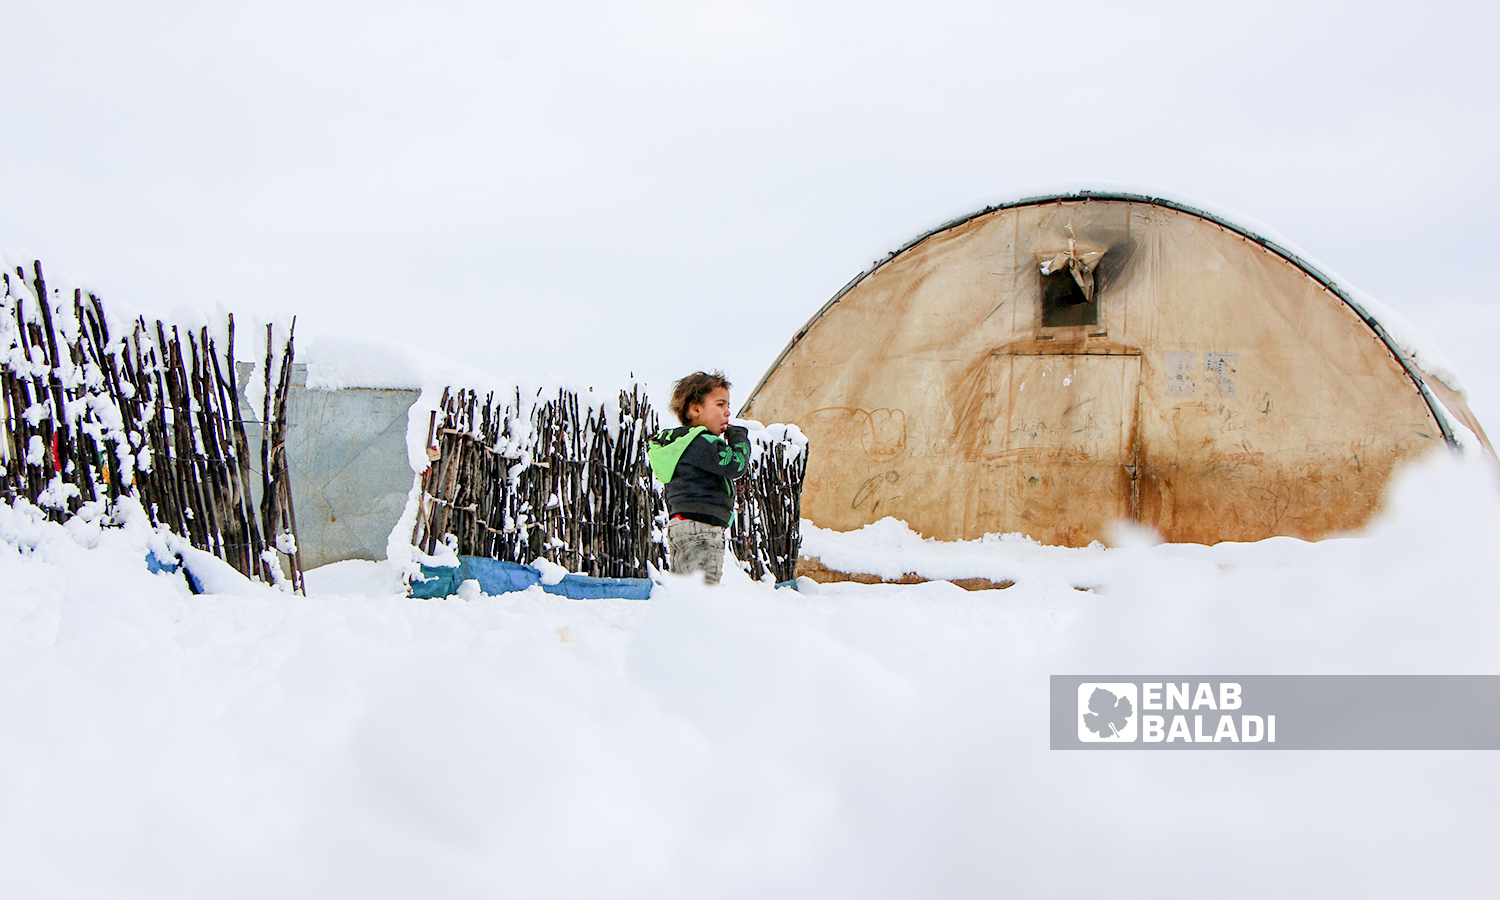 Displaced Syrians clear accumulated snow off the roof of their tents following snowstorms that hit the Sheikh Bilal camp in Rajo area of Afrin district, northern Aleppo - 20 January 2022 (Enab Baladi / Malek al-Habal)